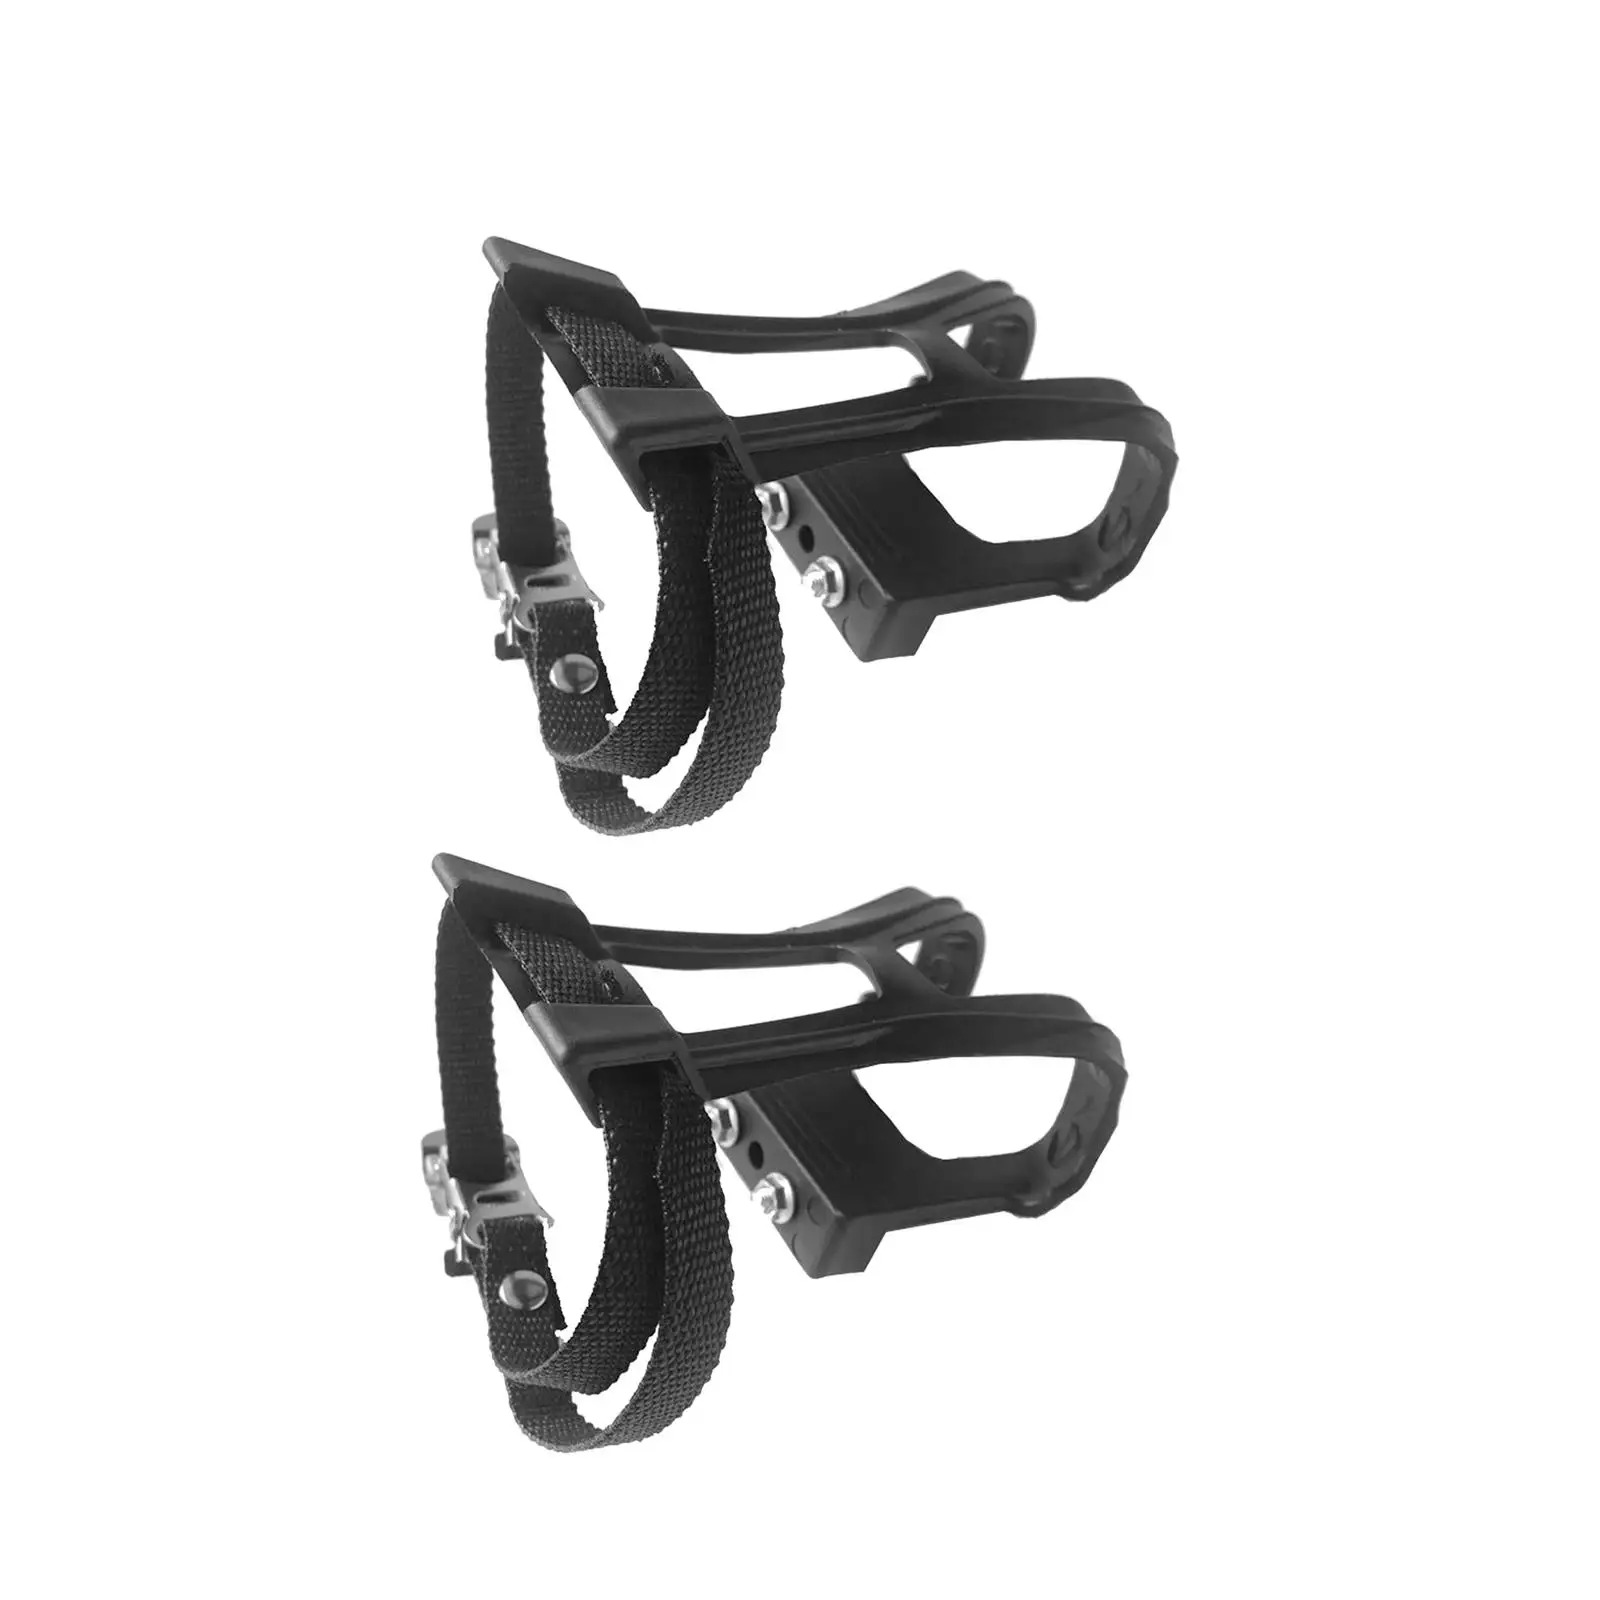 Bike Pedals Toe Clips Replacement Bike Pedals Accessories for Indoor Riding Mountain Bike Fixed Gear Bike Gym Stationary Bike